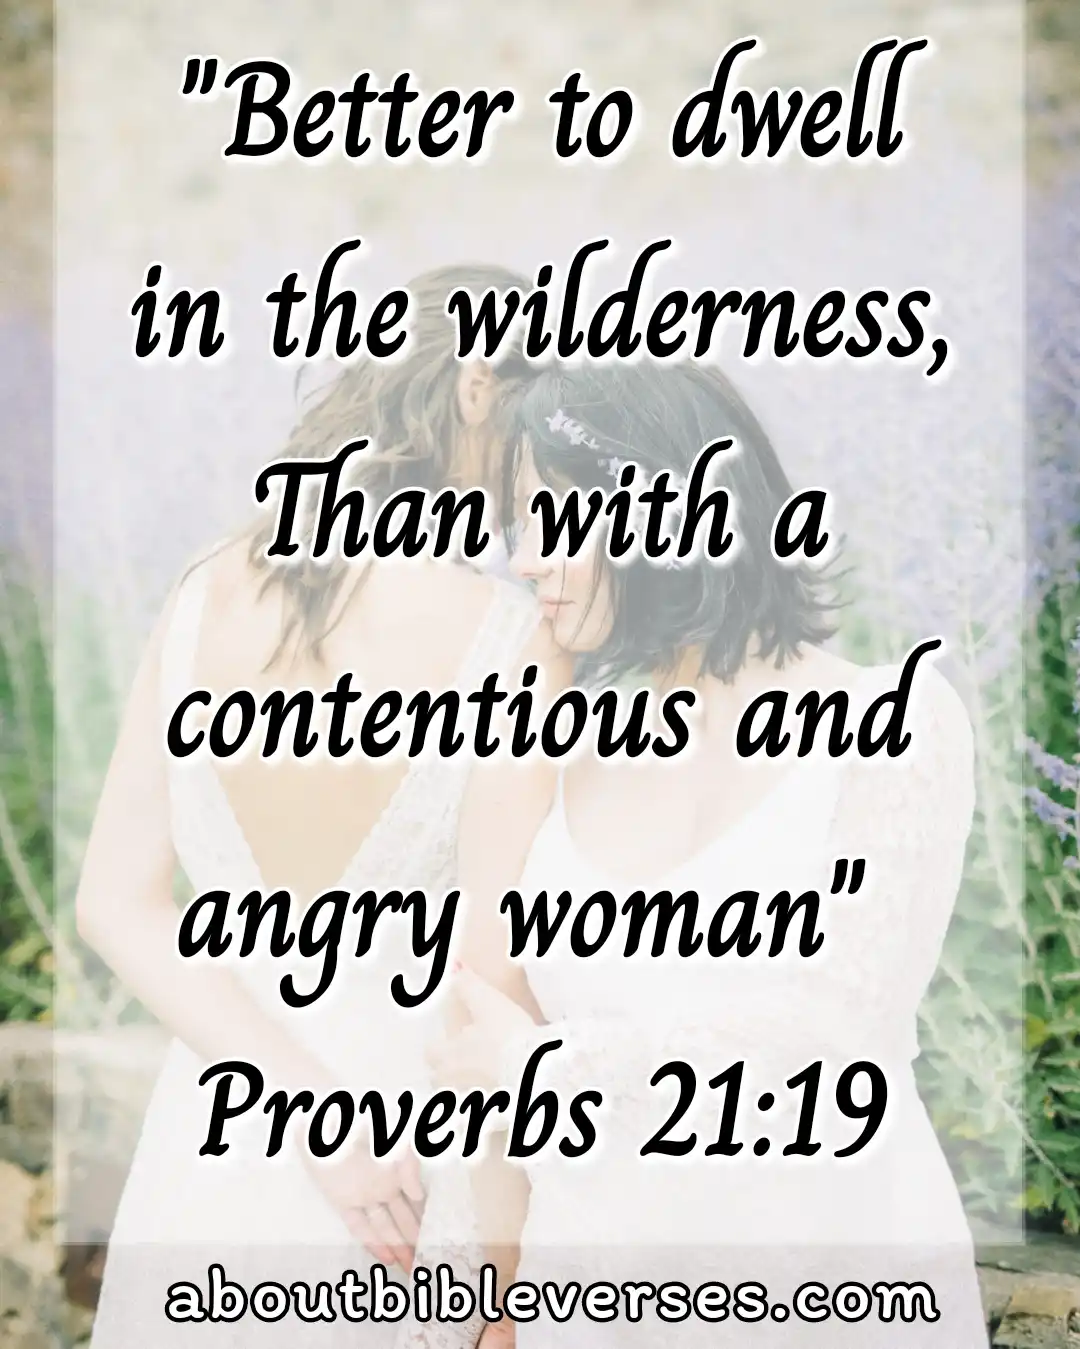 Marriage Bible Verses (Proverbs 21:19)